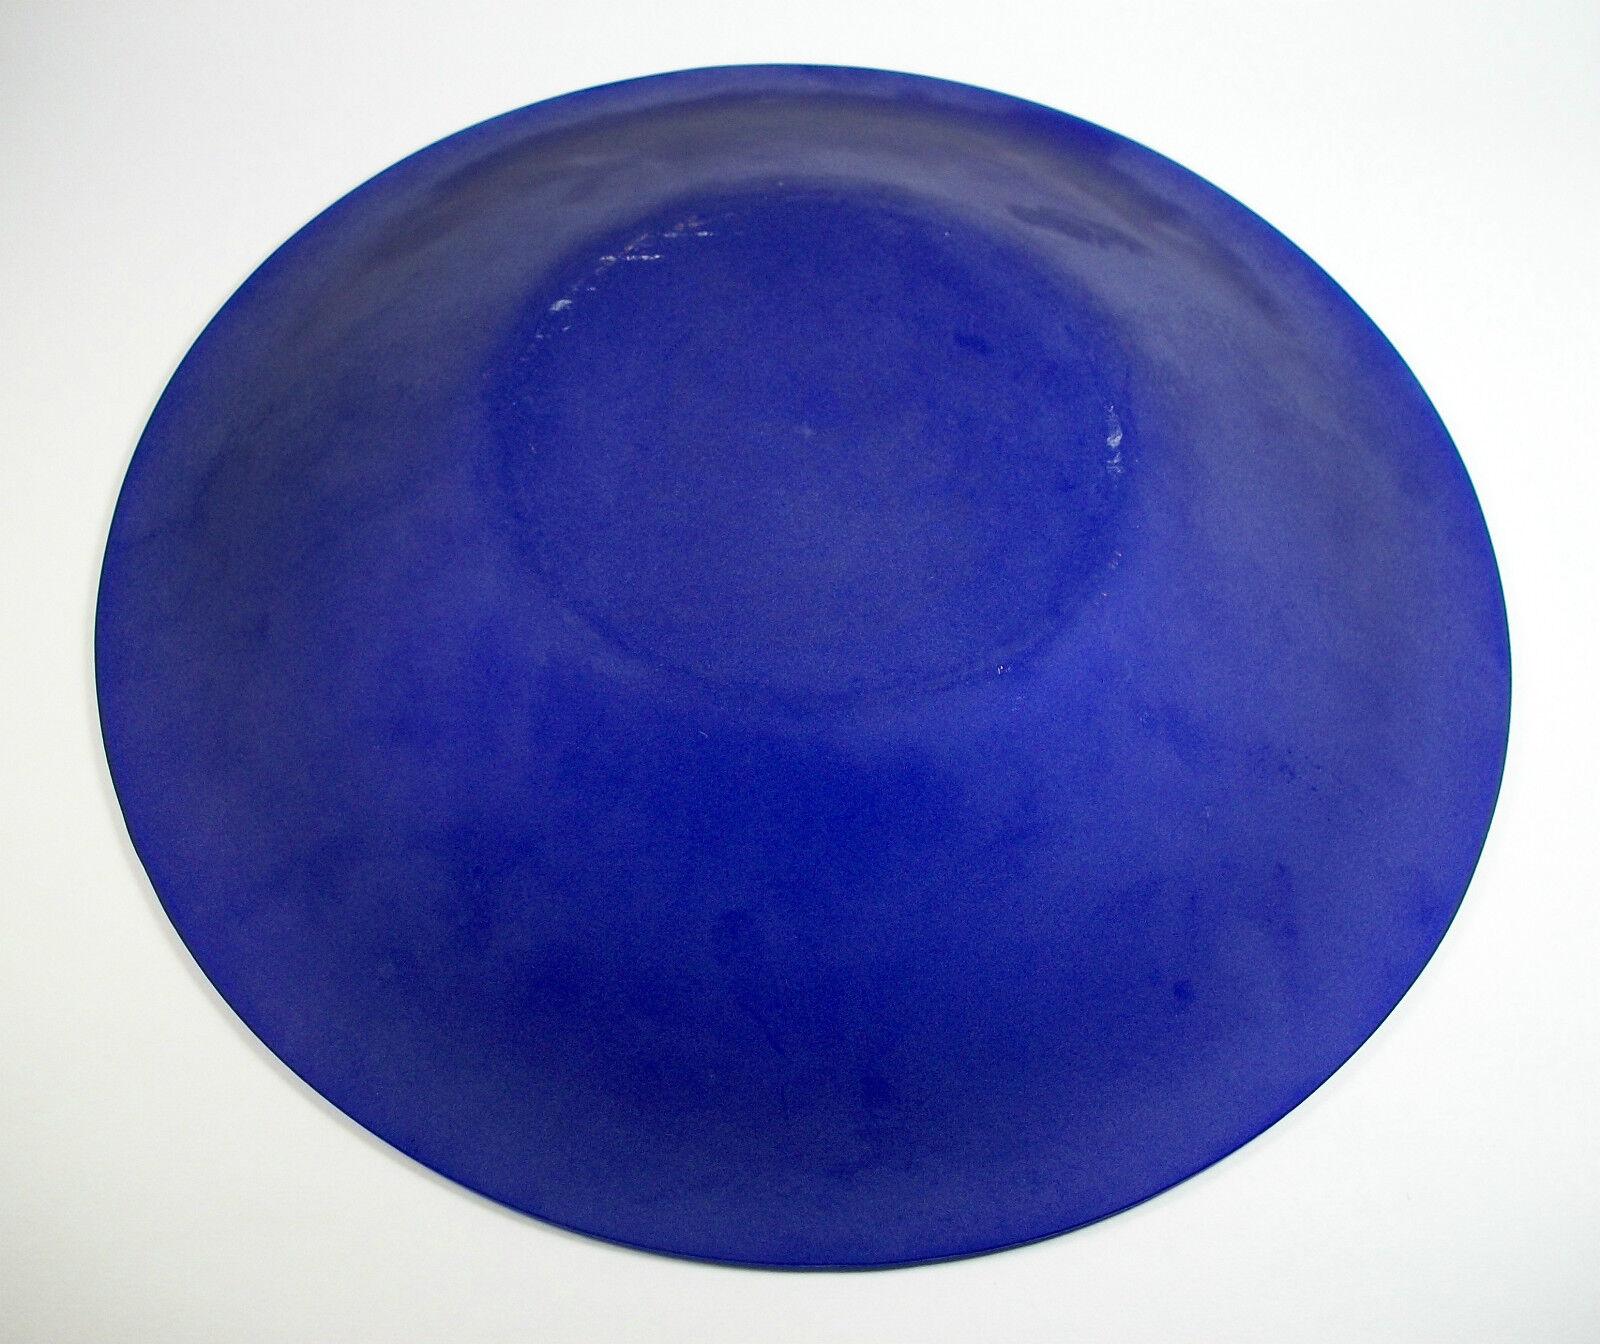 20th Century P. FOGARTY - Vintage Studio Glass Bowl - Etched & Frosted - Signed - Mid 20th C. For Sale